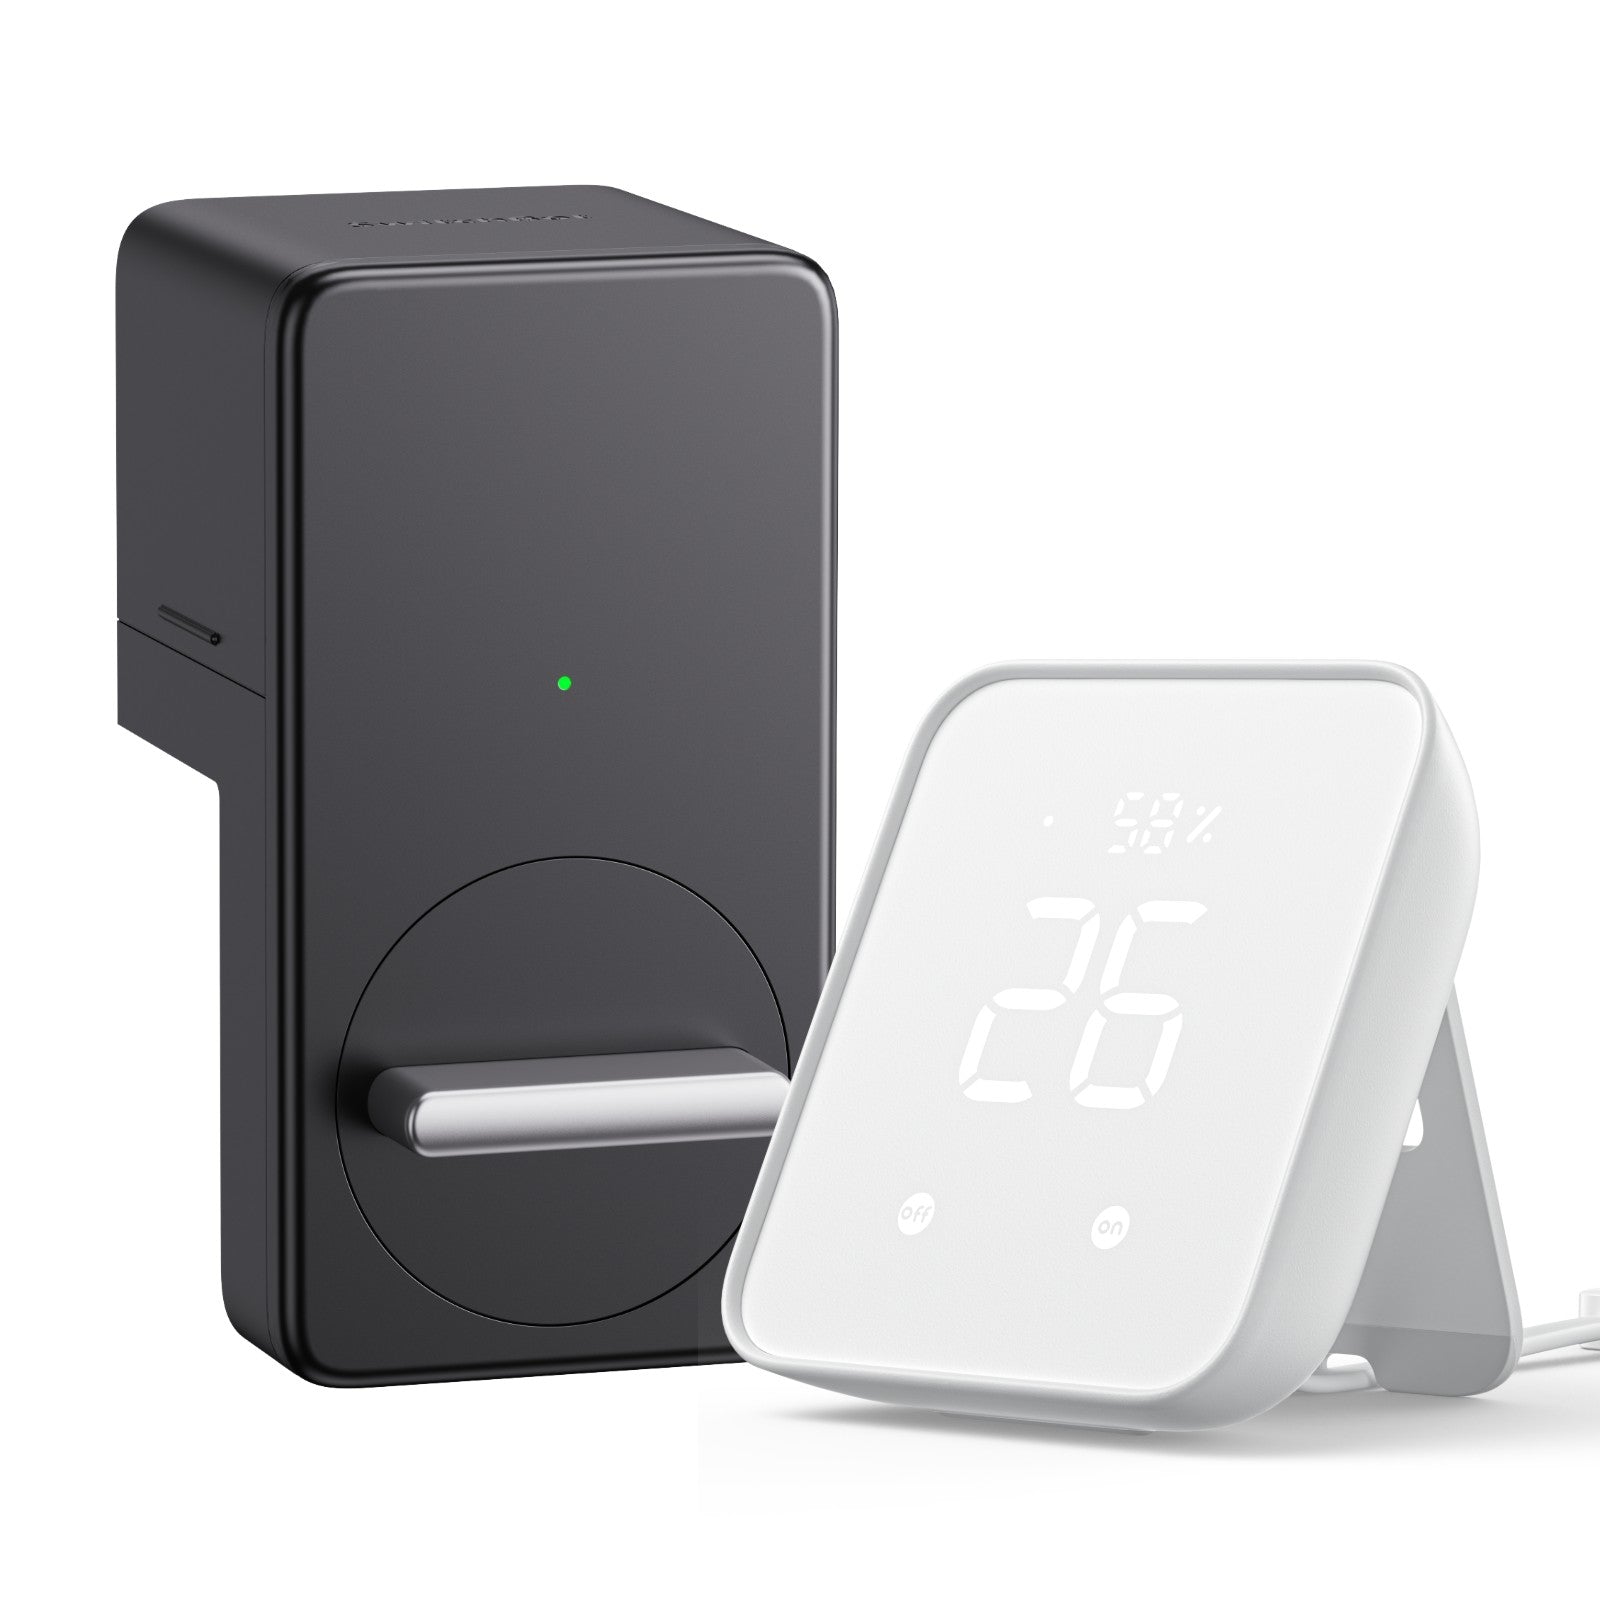 Smart Home Hub 2 & Smart Lock & Keypad Touch, Home Security Combo